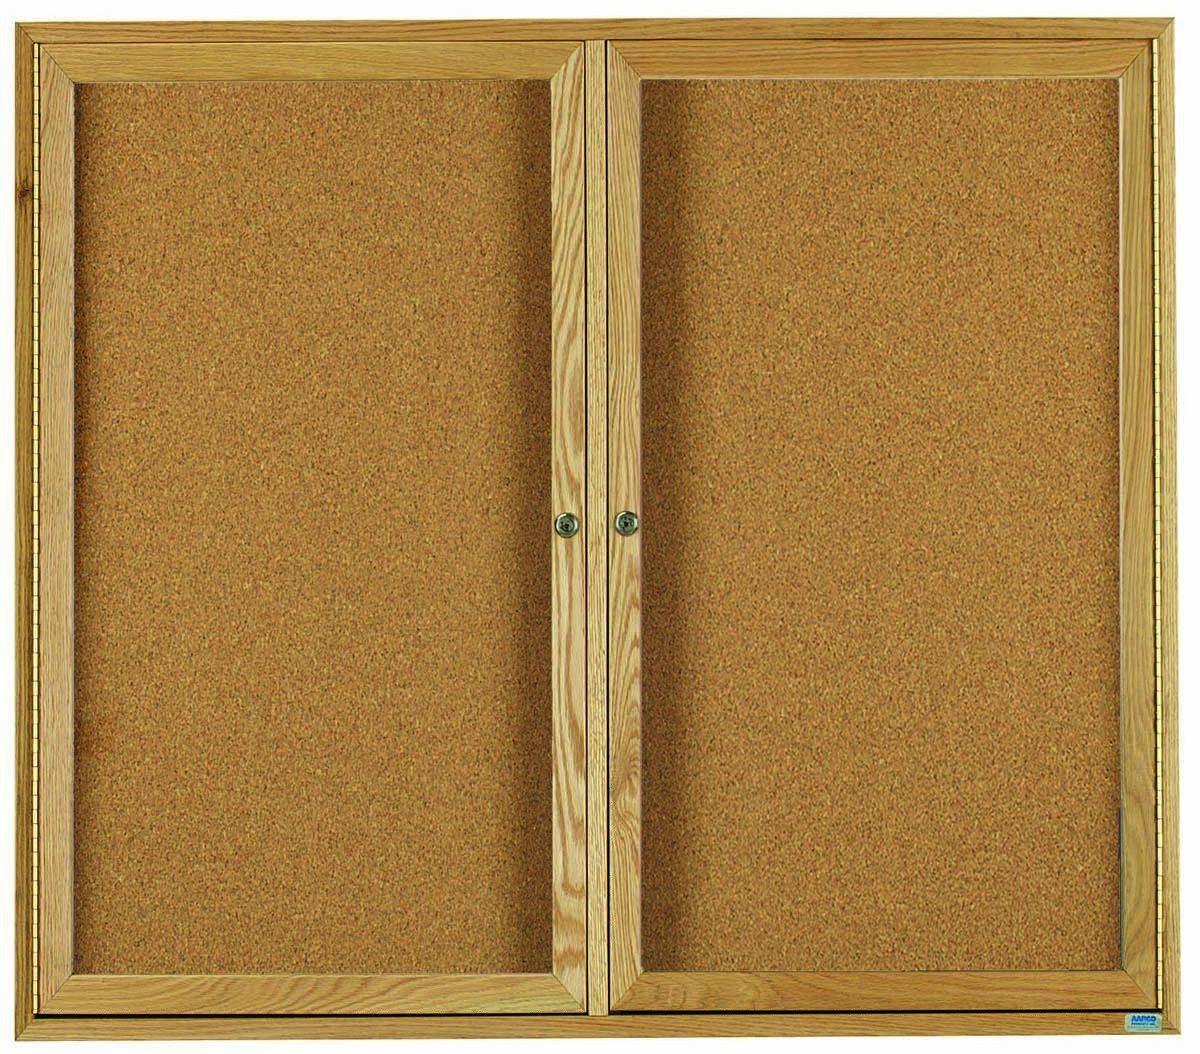 Aarco Products OBC3648R 2 Door Enclosed Bulletin Board with Natural Oak Frame, 48"W x 36"H